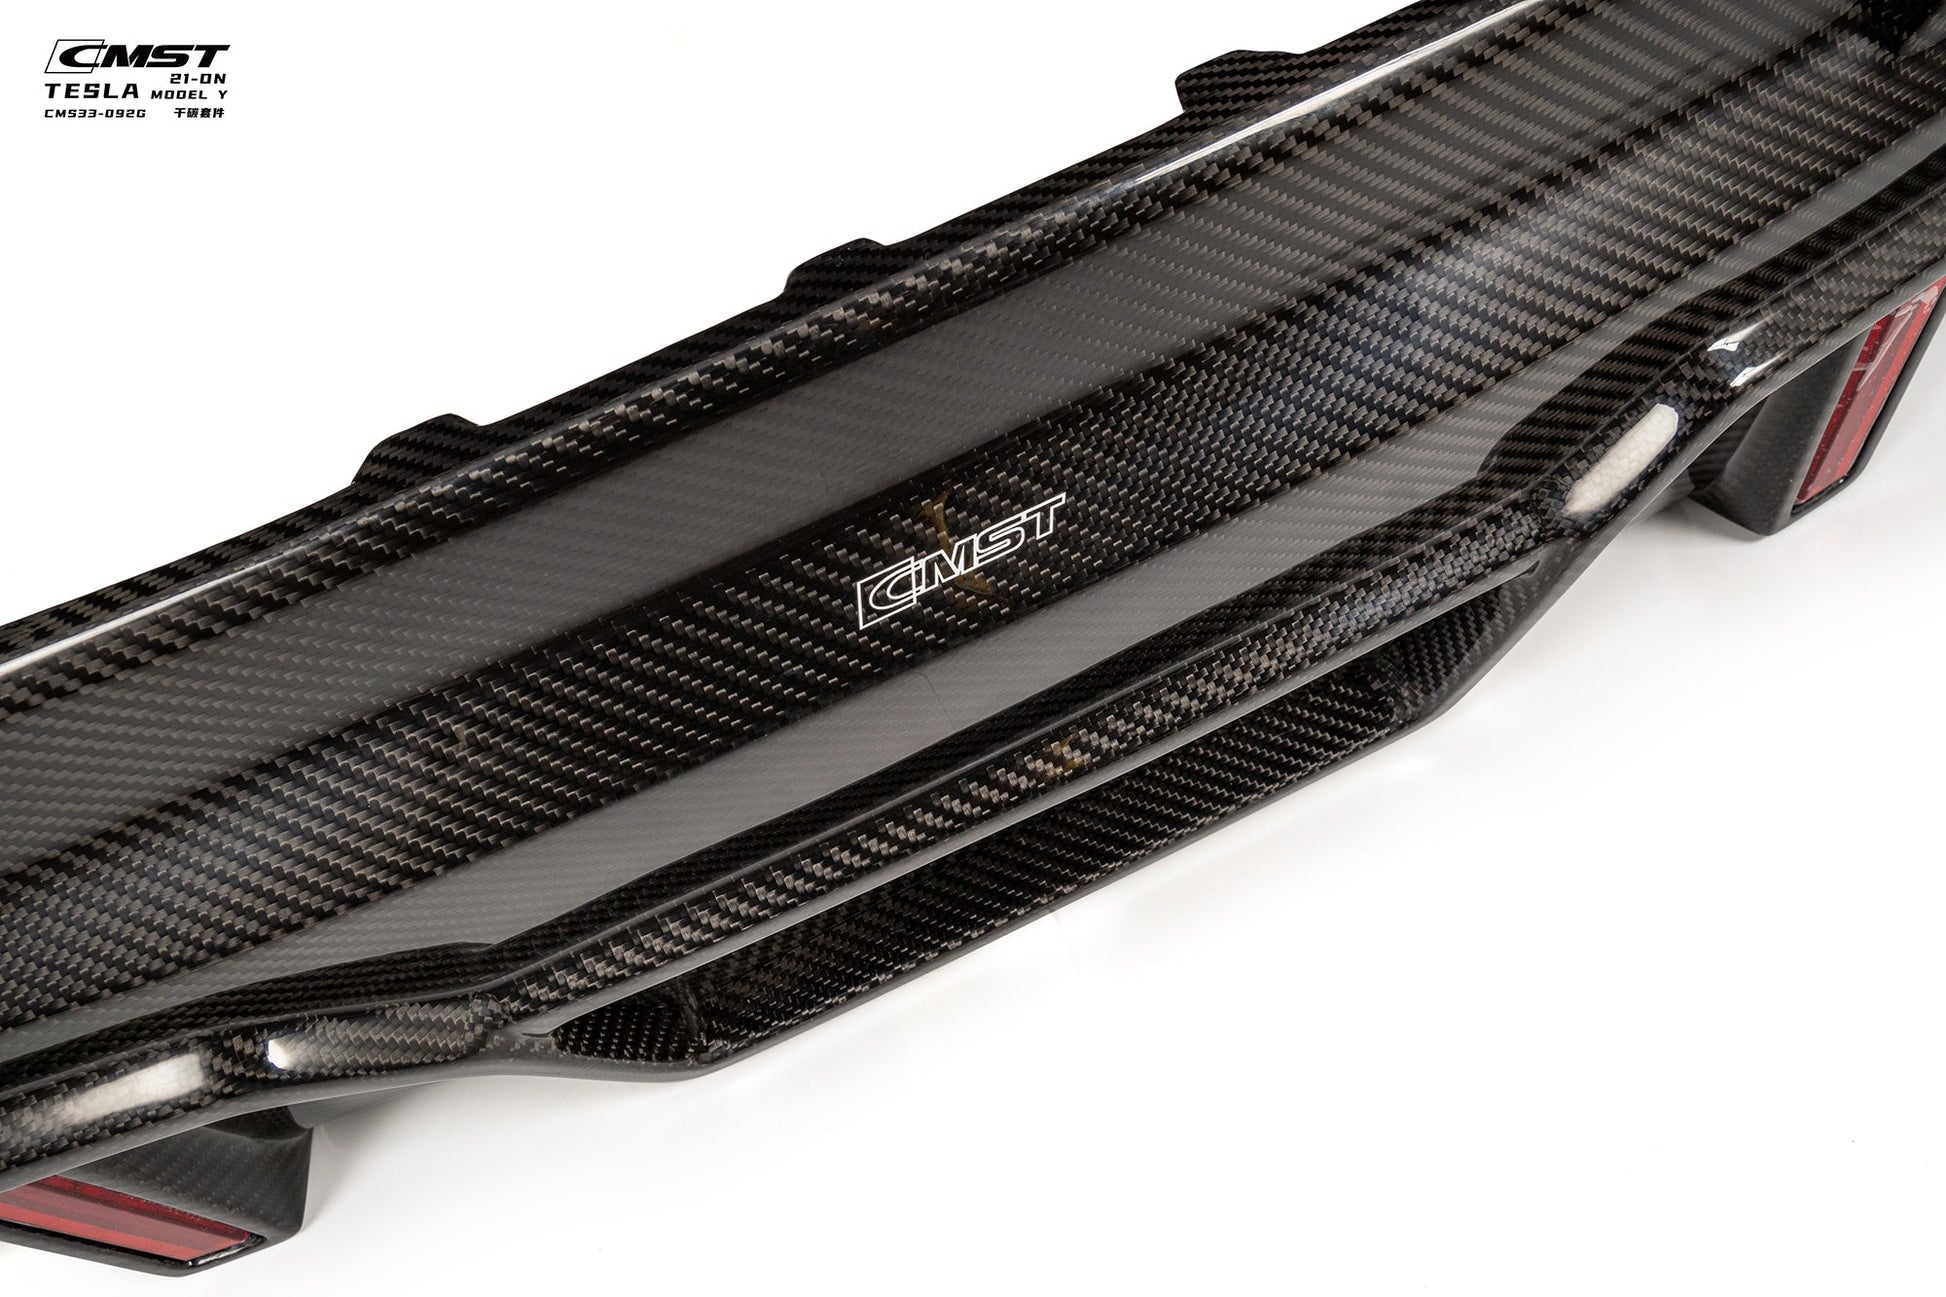 TESERY×CMST Carbon Fiber Rear Diffuser Ver.4 with tow hook access for Tesla Model Y - Tesery Official Store